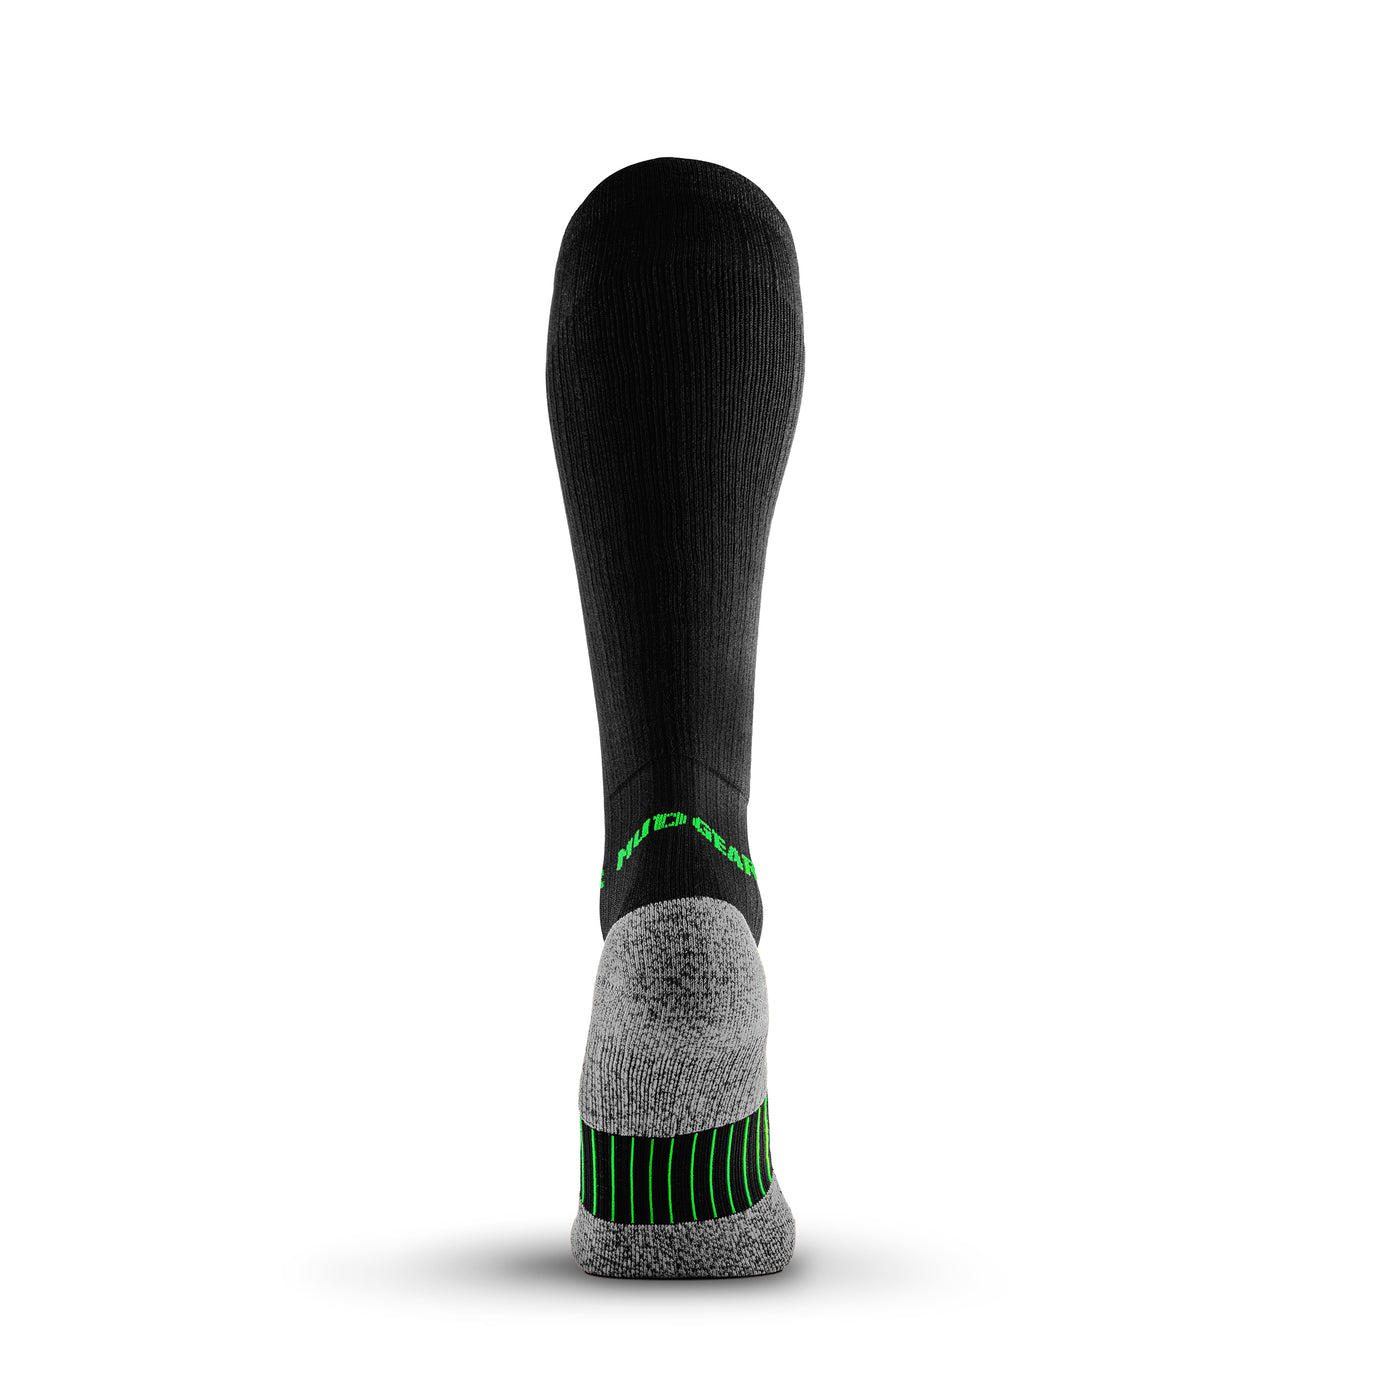 Tall Compression Socks for Obstacle Course Racing (Black/Green)